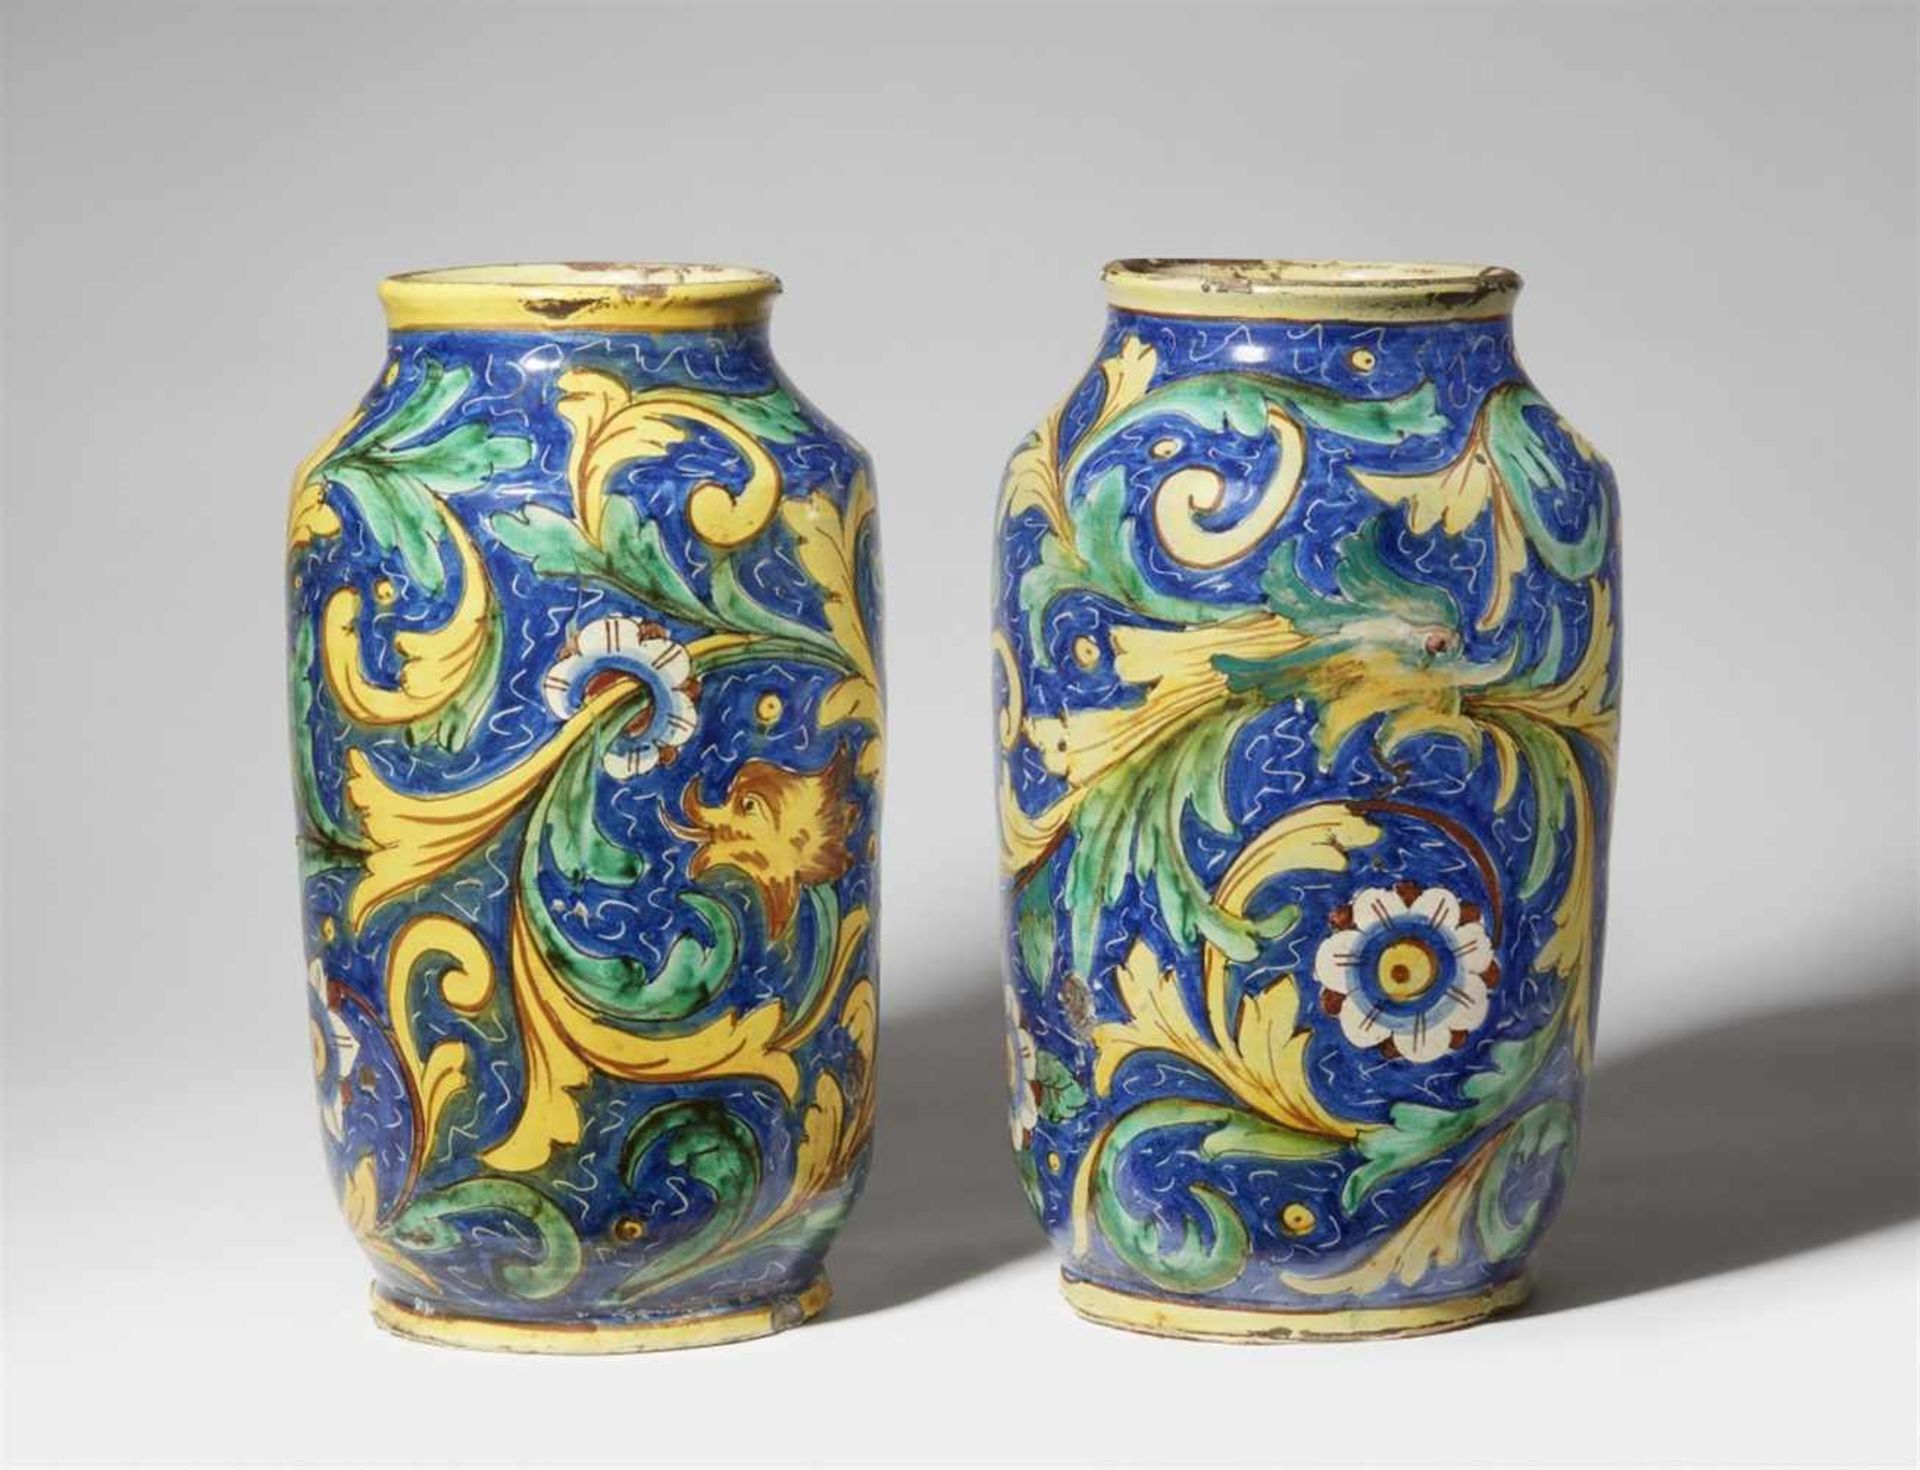 A pair of large Sicilian majolica albarelliOf near cylindrical section with slightly flaring rims.